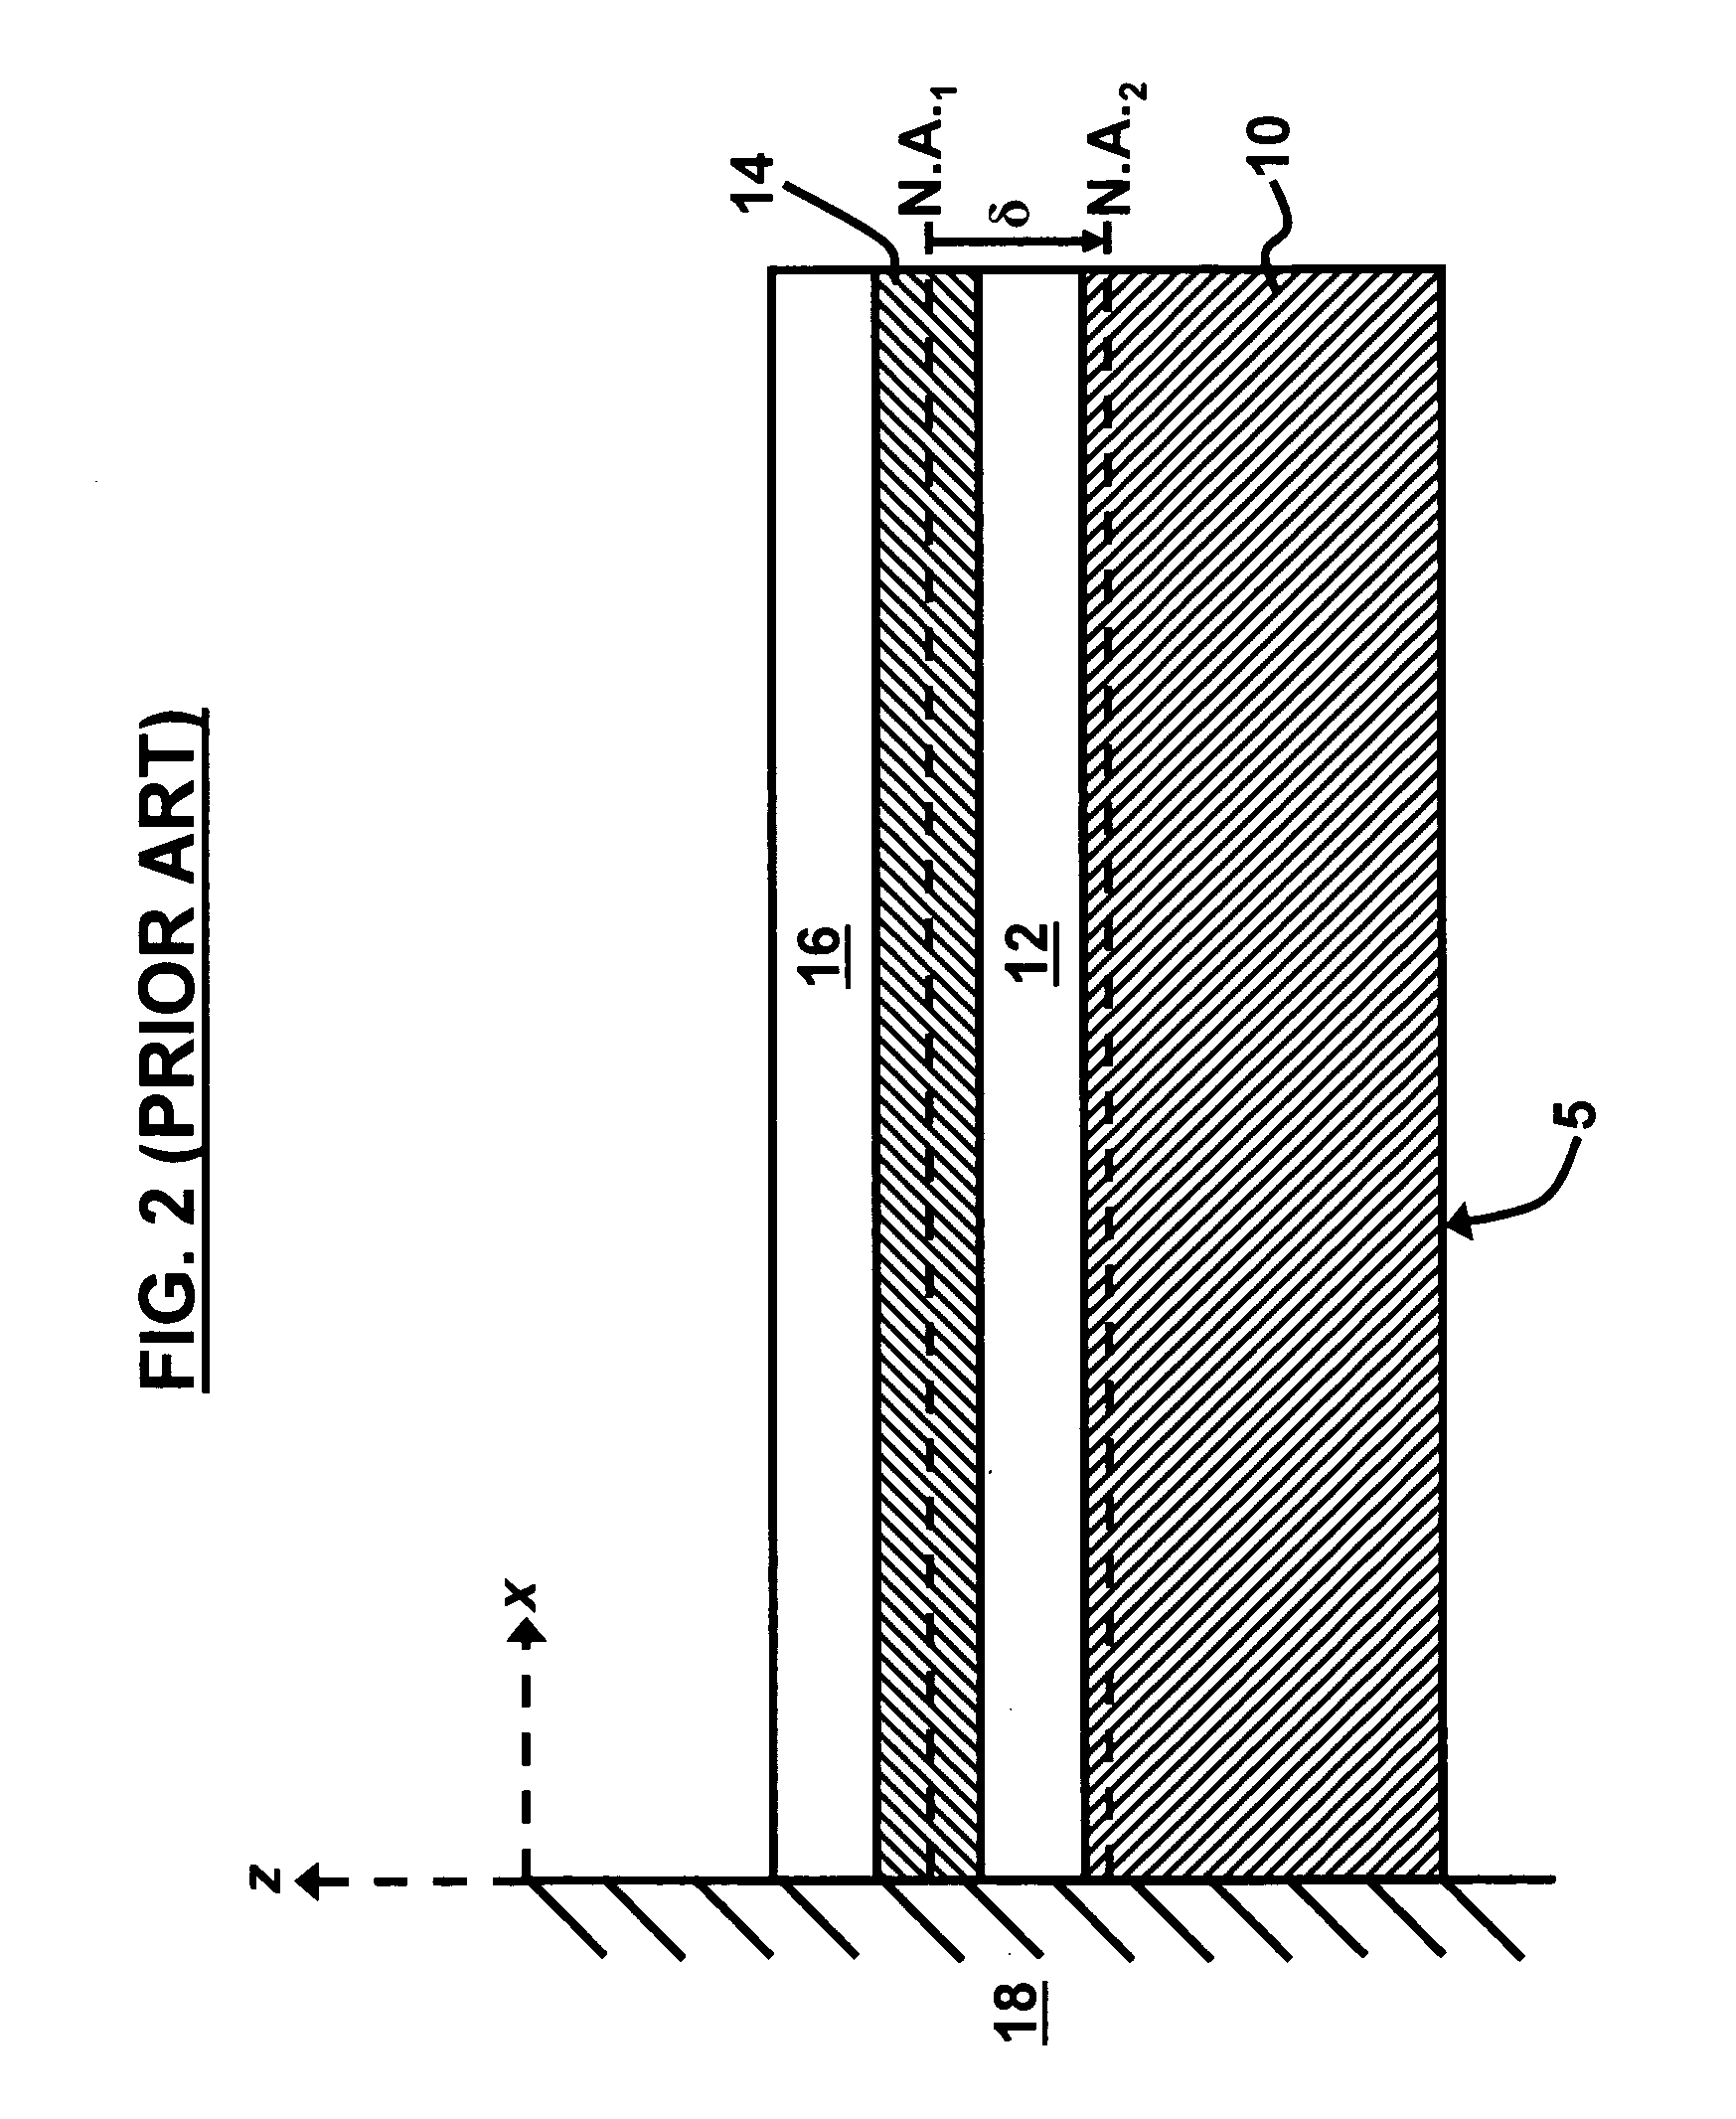 Lateral piezoelectric microelectromechanical system (MEMS) actuation and sensing device